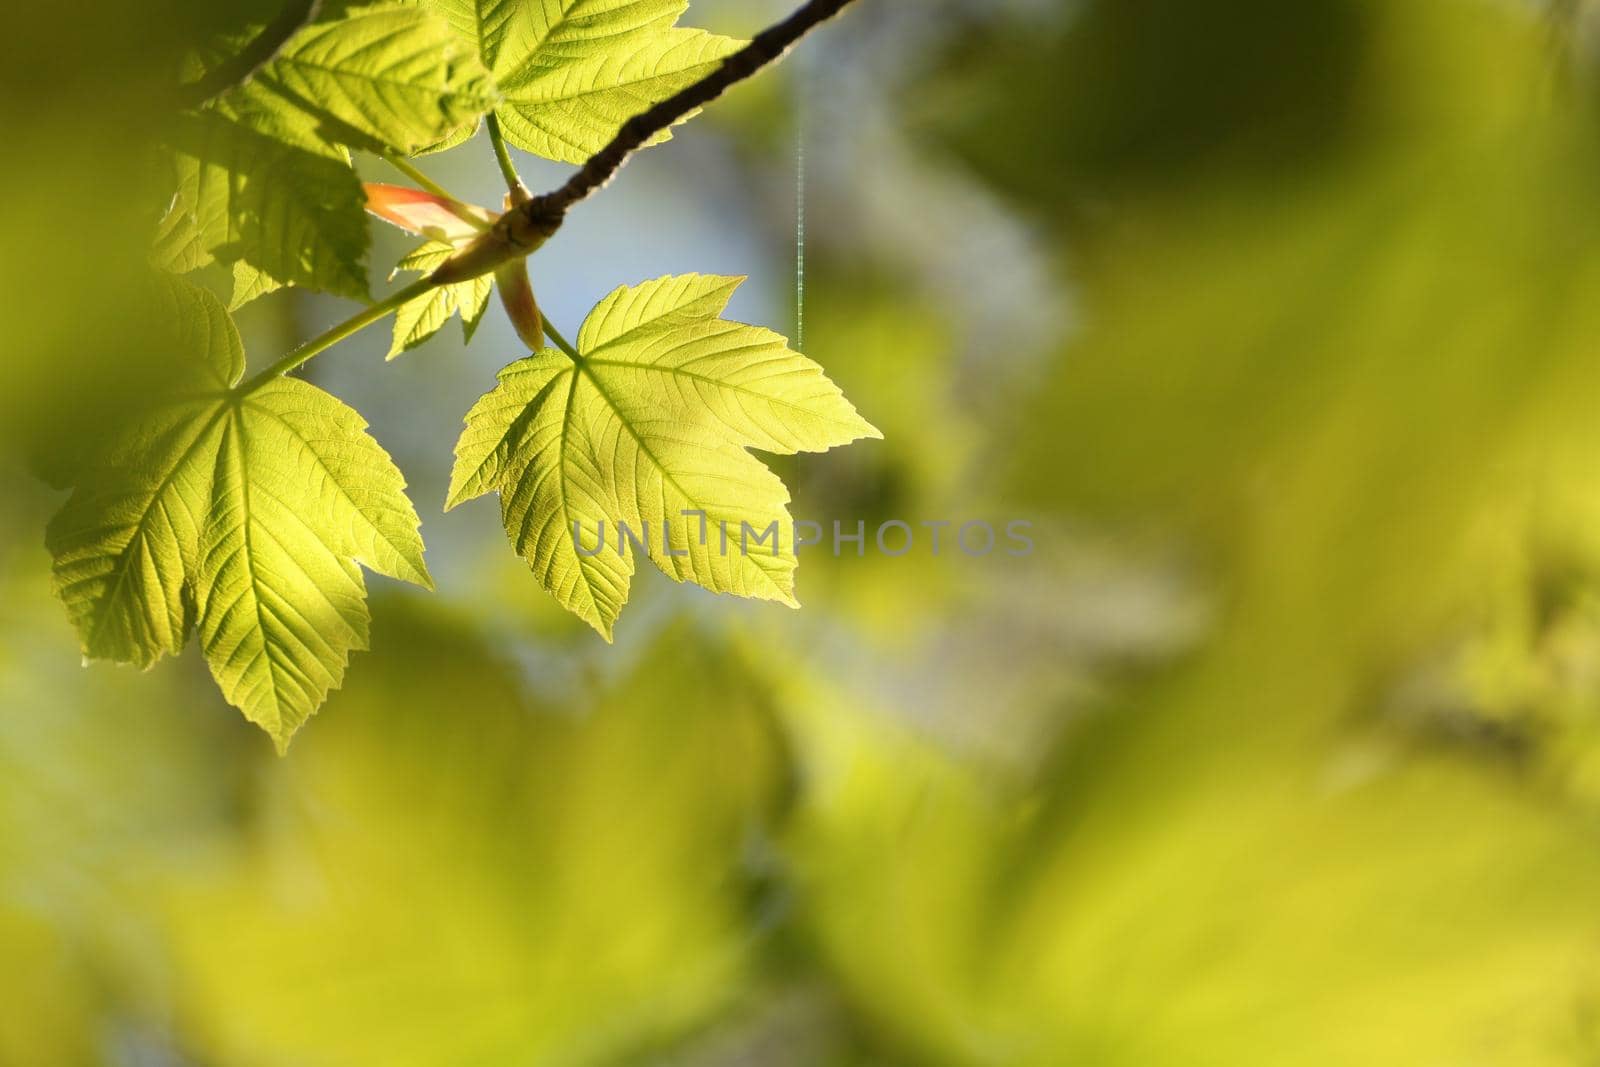 Sycamore maple leaves in the forest.